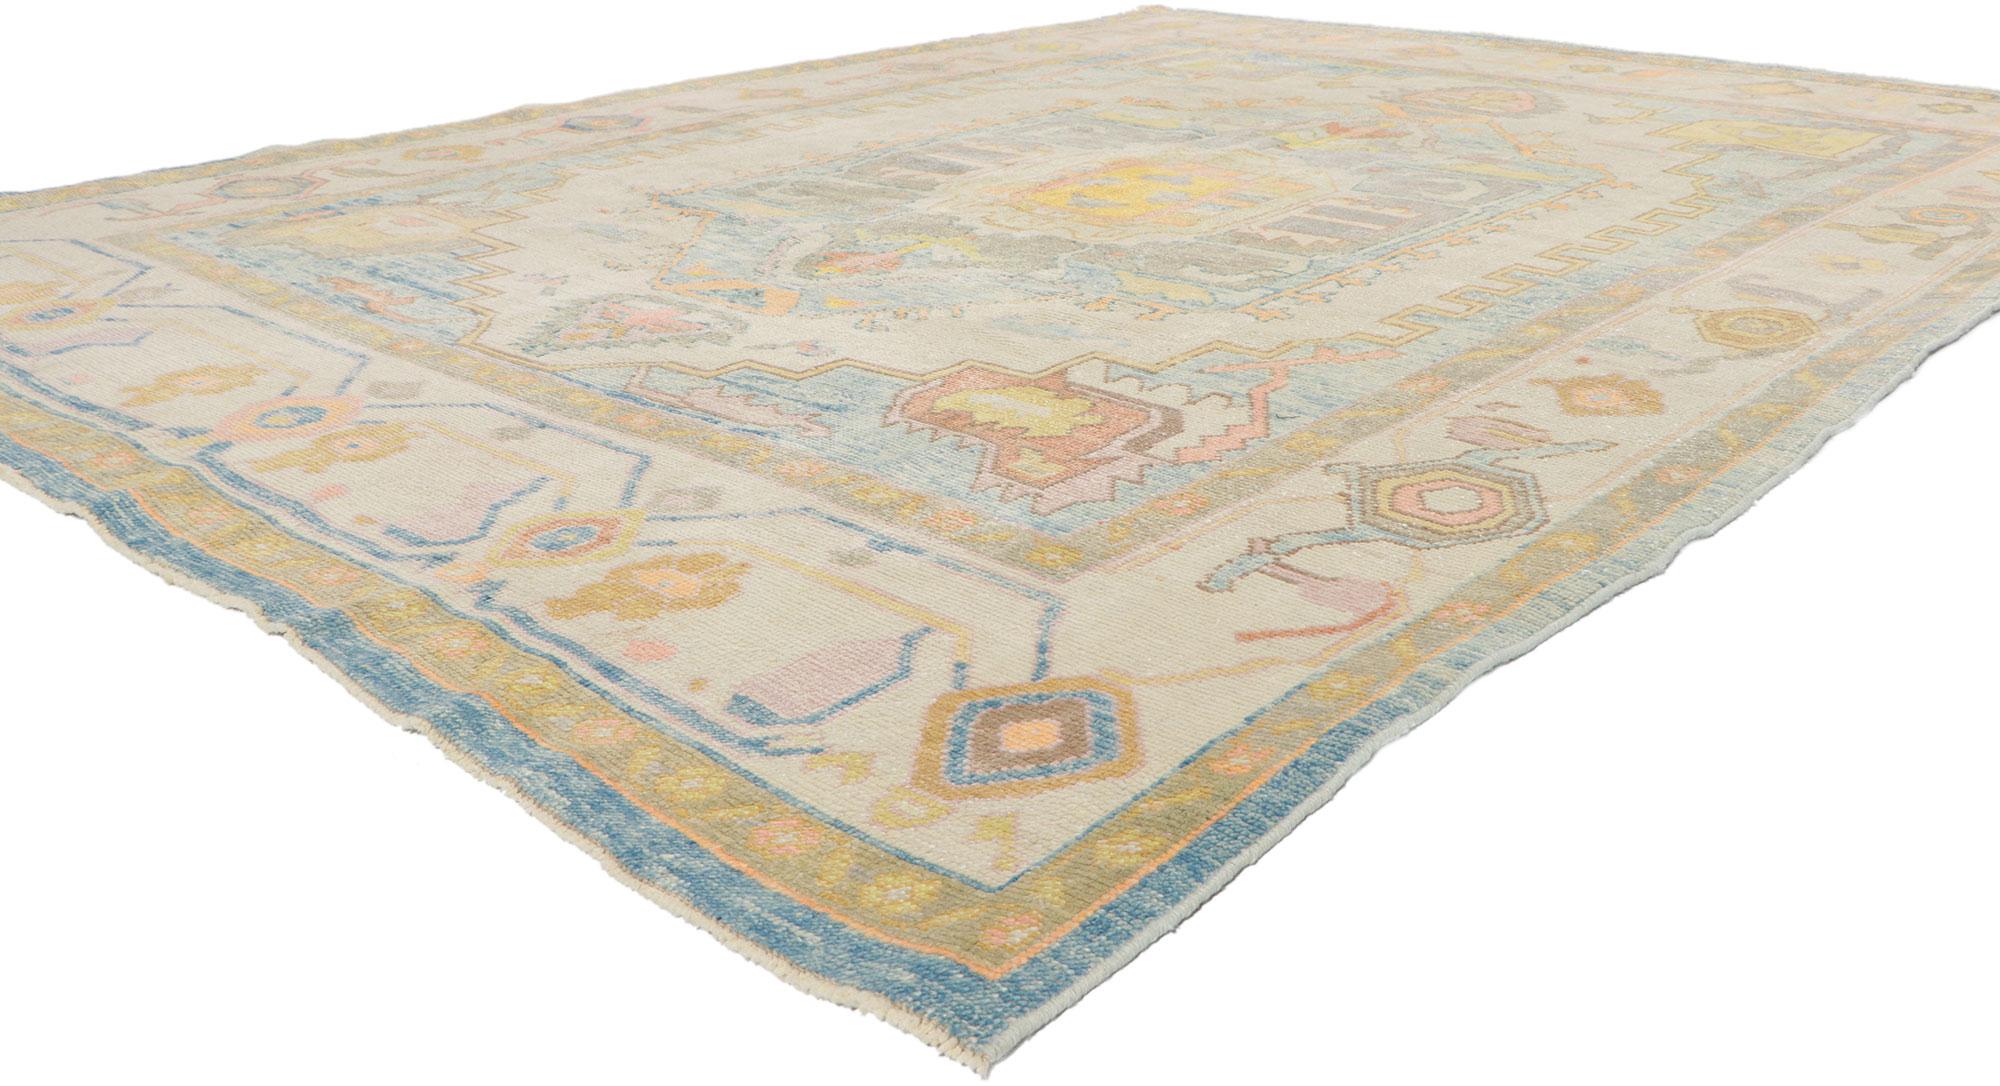 53798 New Colorful Turkish Oushak rug with Modern Style 07'09 x 10'05. Polished and playful, this hand-knotted wool contemporary Turkish Oushak rug beautifully embodies a modern style. With elements of comfort, modern style and functional